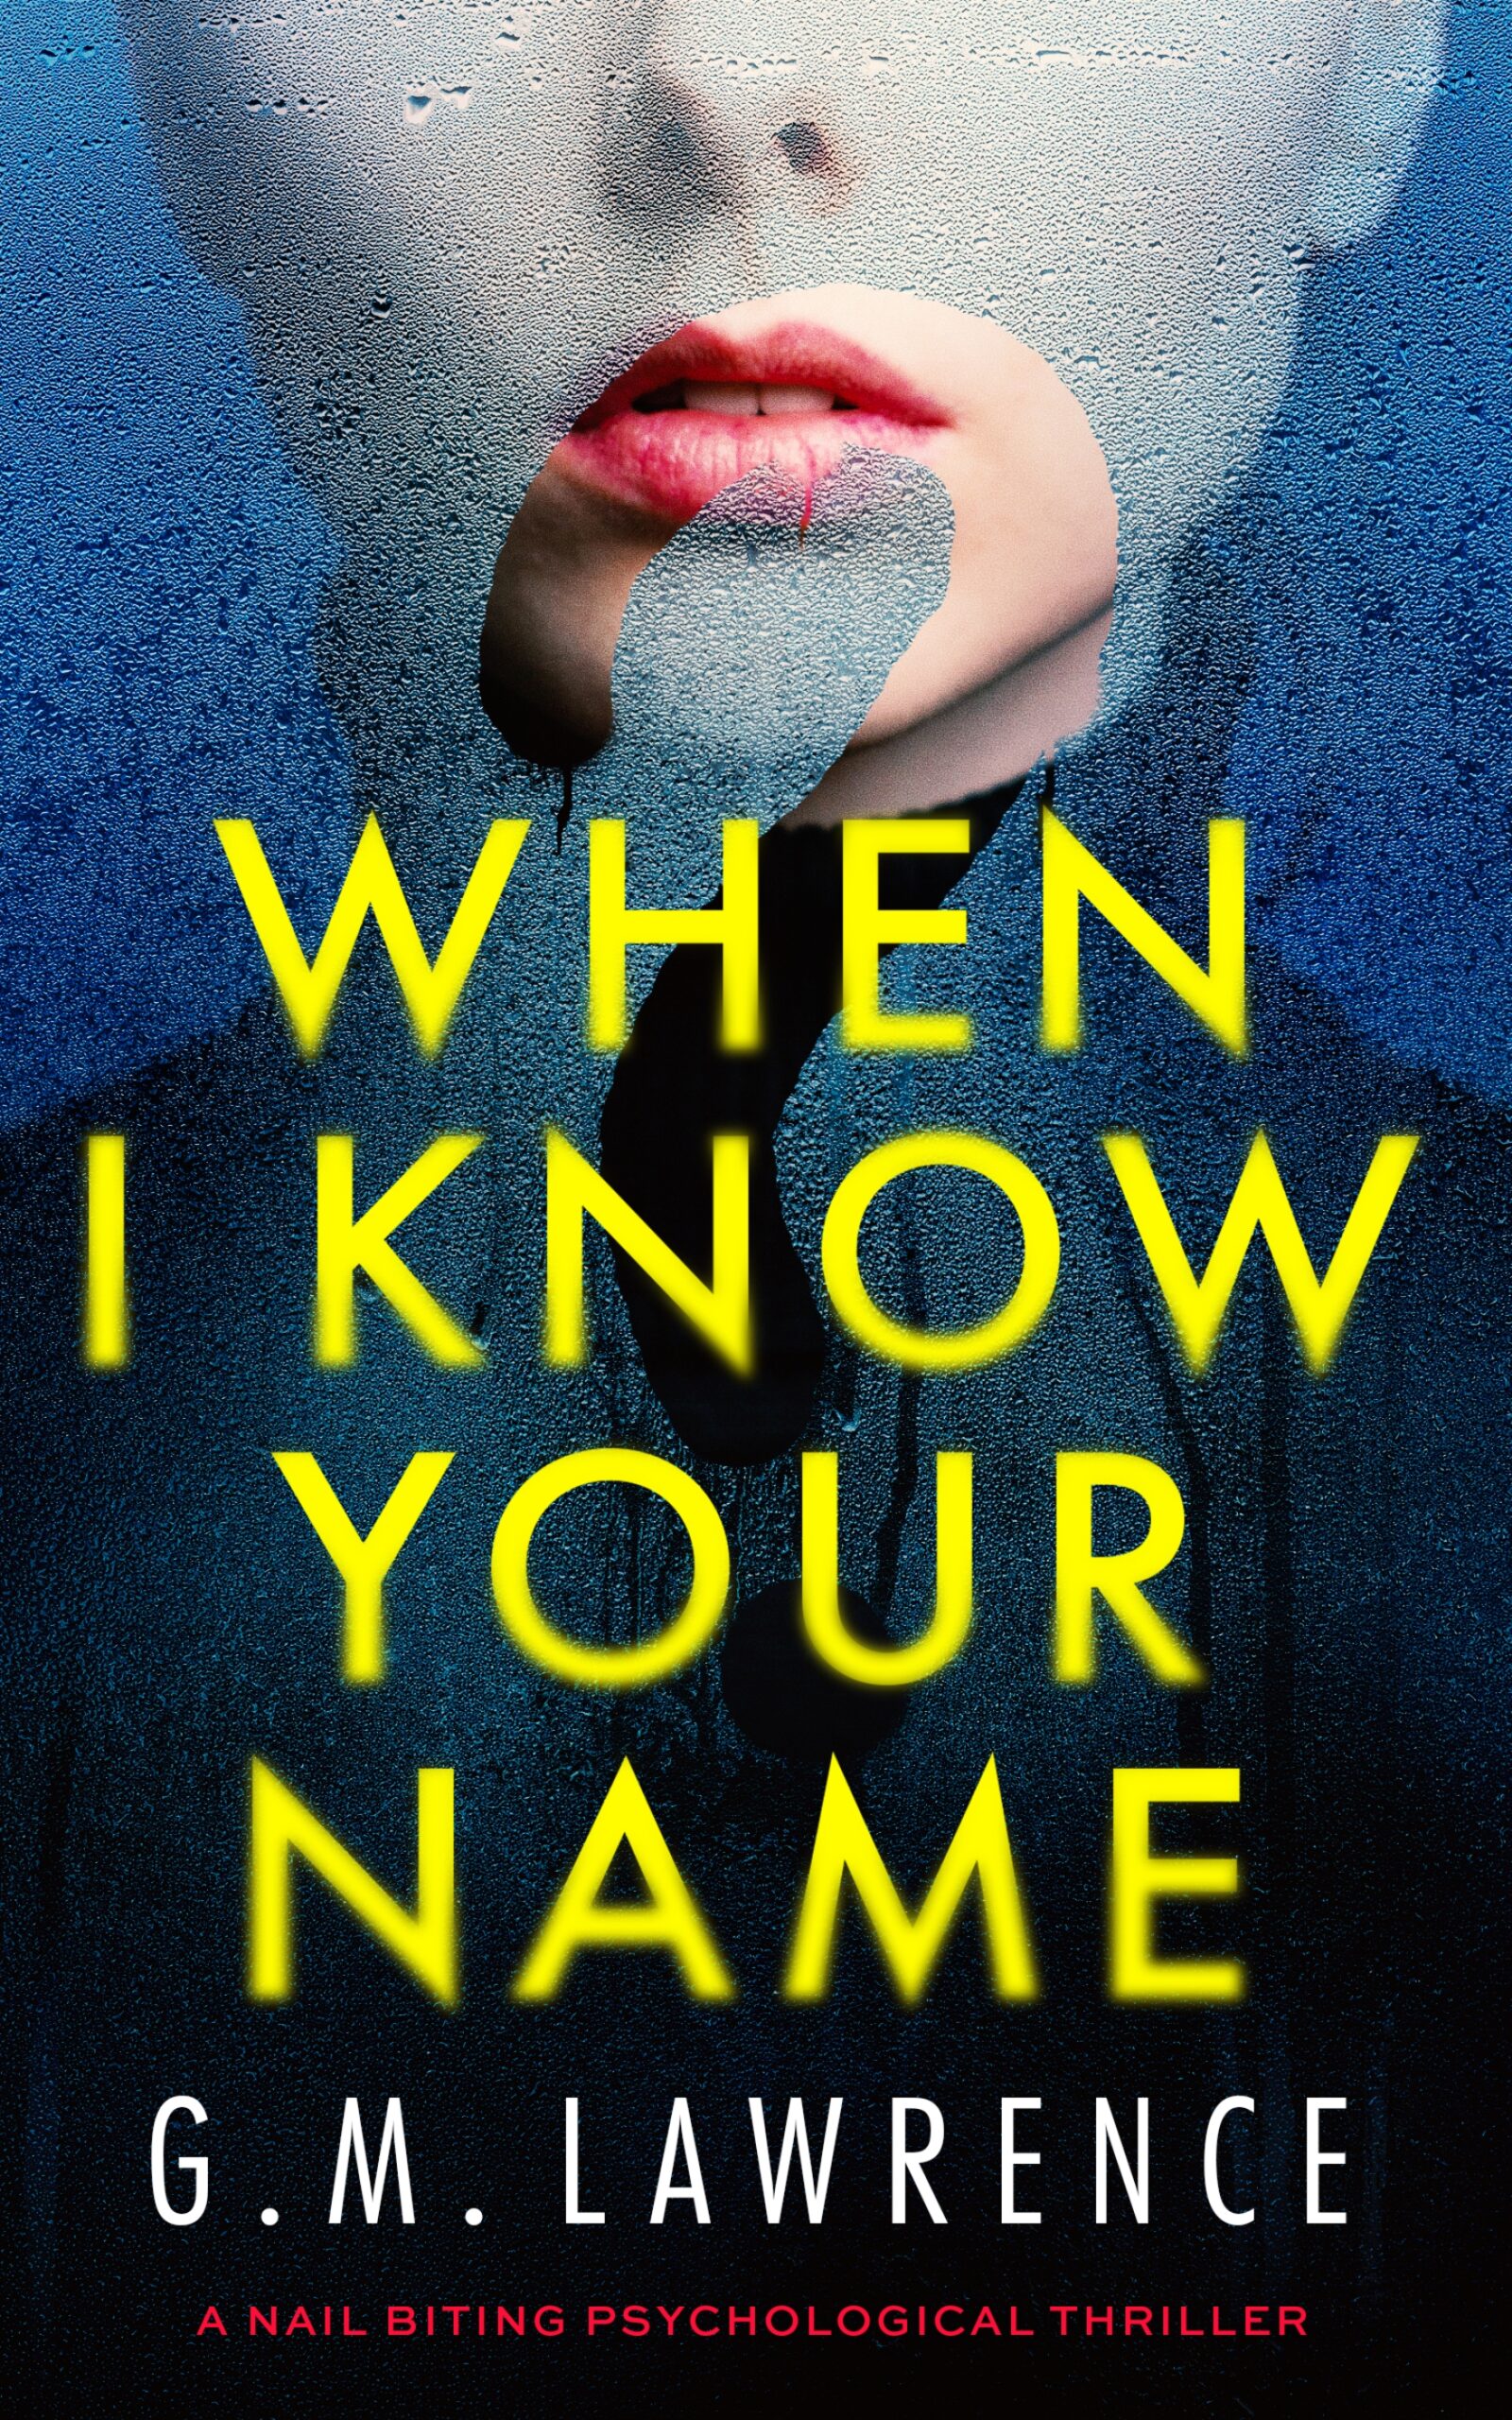 G.M. LAWRENCE NEW RELEASE – WHEN I KNOW YOUR NAME